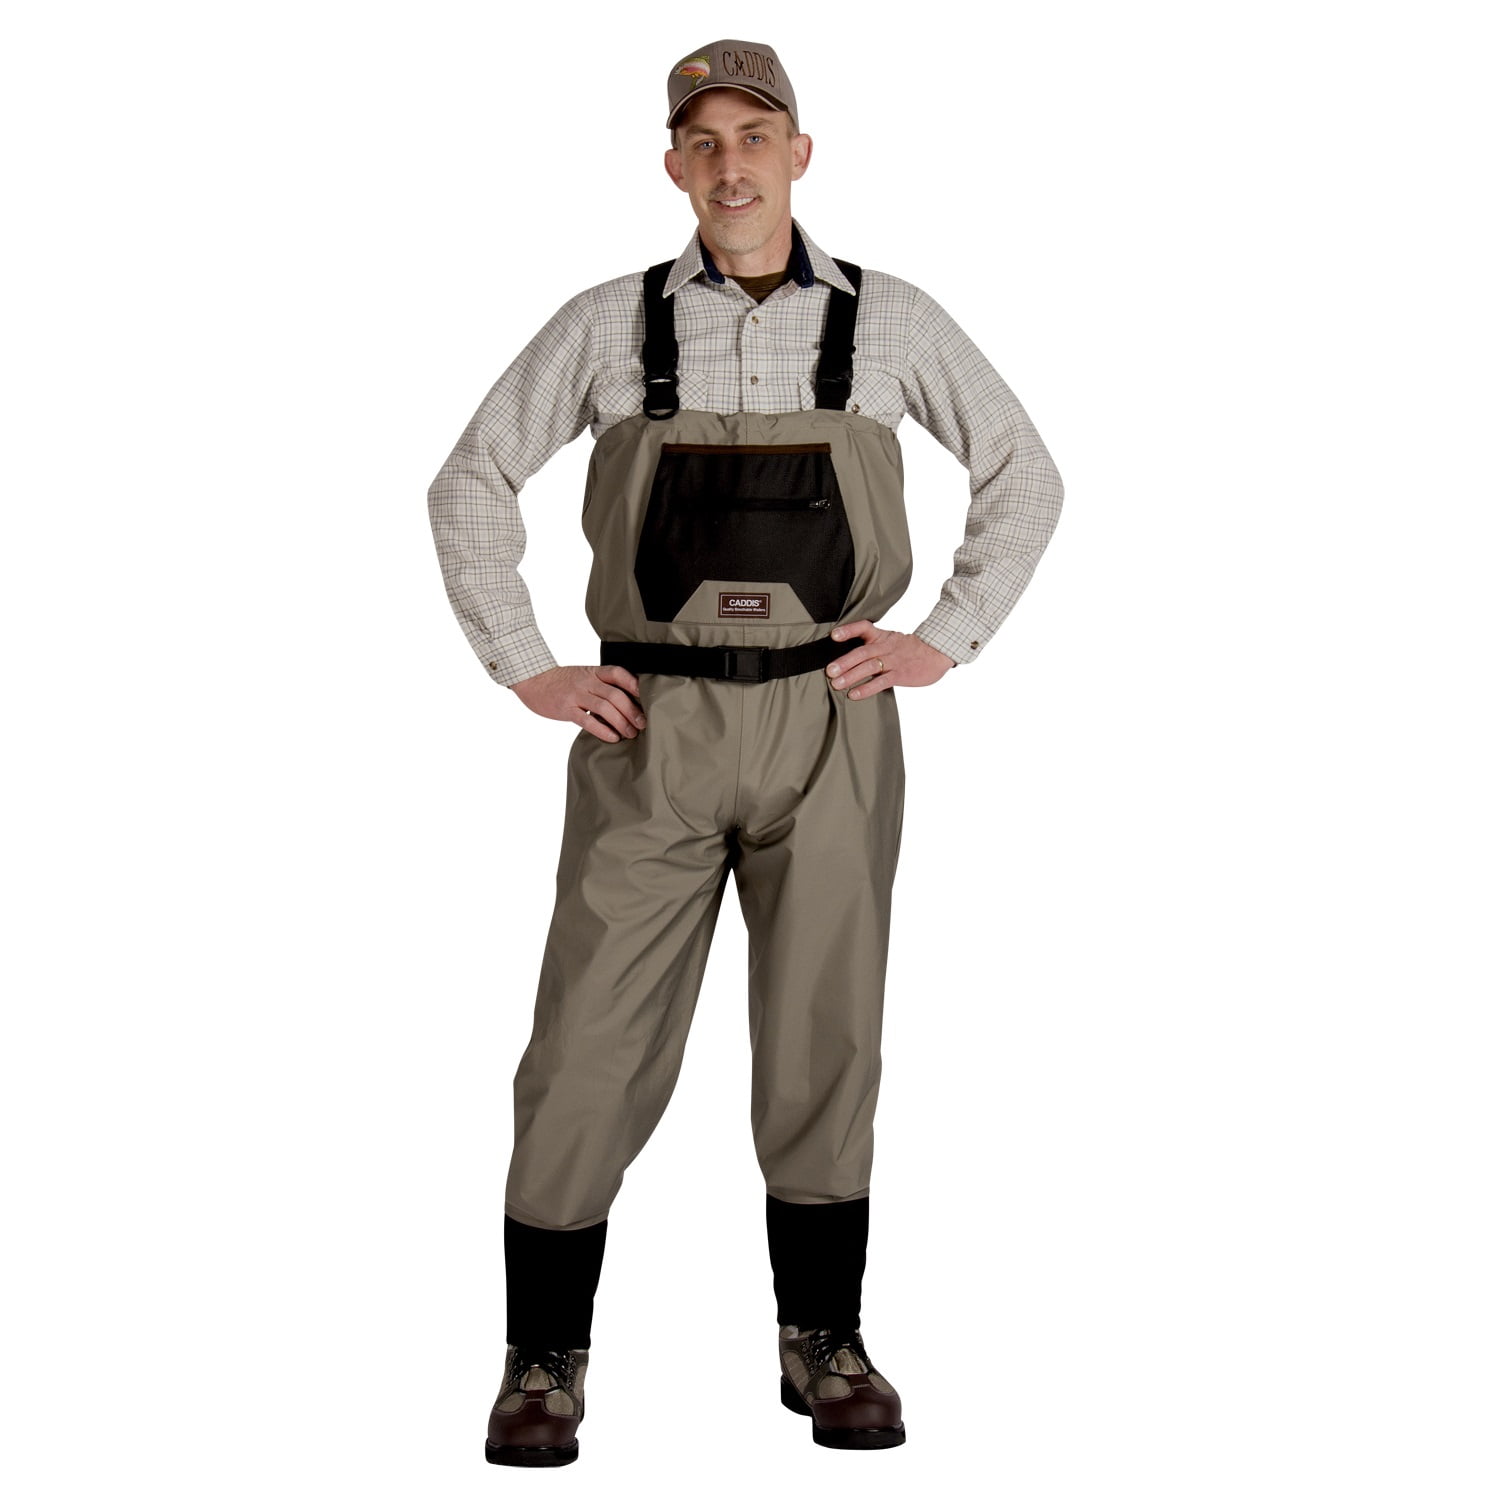 Kylebooker Waterproof Breathable Stockingfoot Chest Waders Featuring Premium Five Layer Fabric Fishing Hunting Waders KB007 S